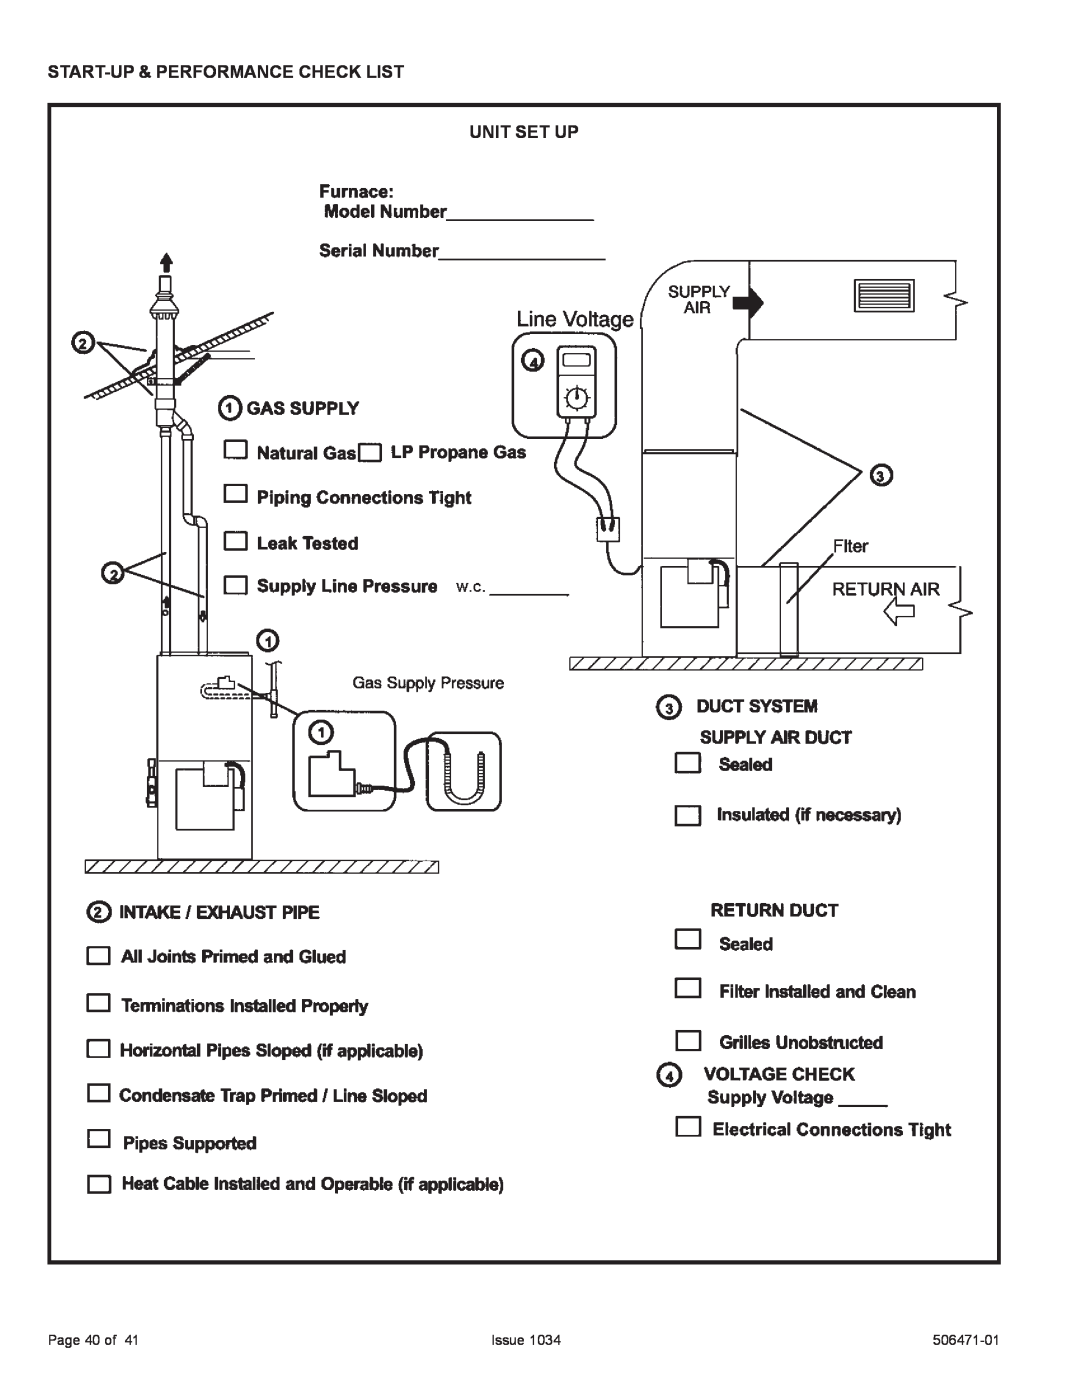 Allied Air Enterprises A80UH2V, 80G1UH2V Start-Up& Performance Check List Unit Set Up, Page 40 of, Issue, 506471-01 